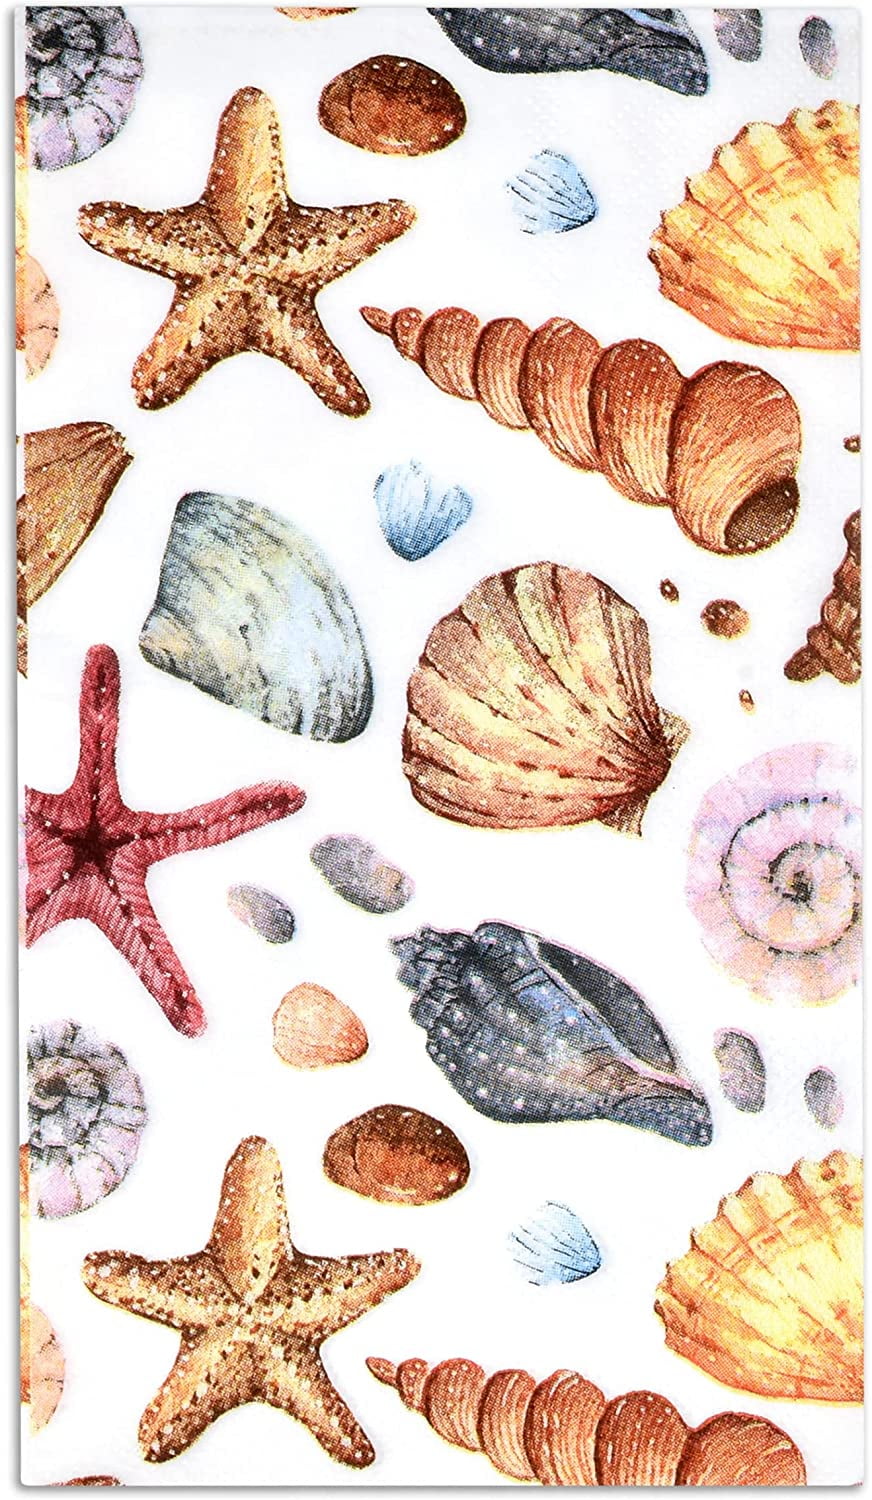 100 Nautical Beach Guest Napkins 3 Ply Disposable Paper Pack Coastal Friends Seashell Sea Shore Summer Dinner Hand Napkin For Bathroom Hotel Gym Spa Party Wedding Bridal Baby Shower Decorative Towels 